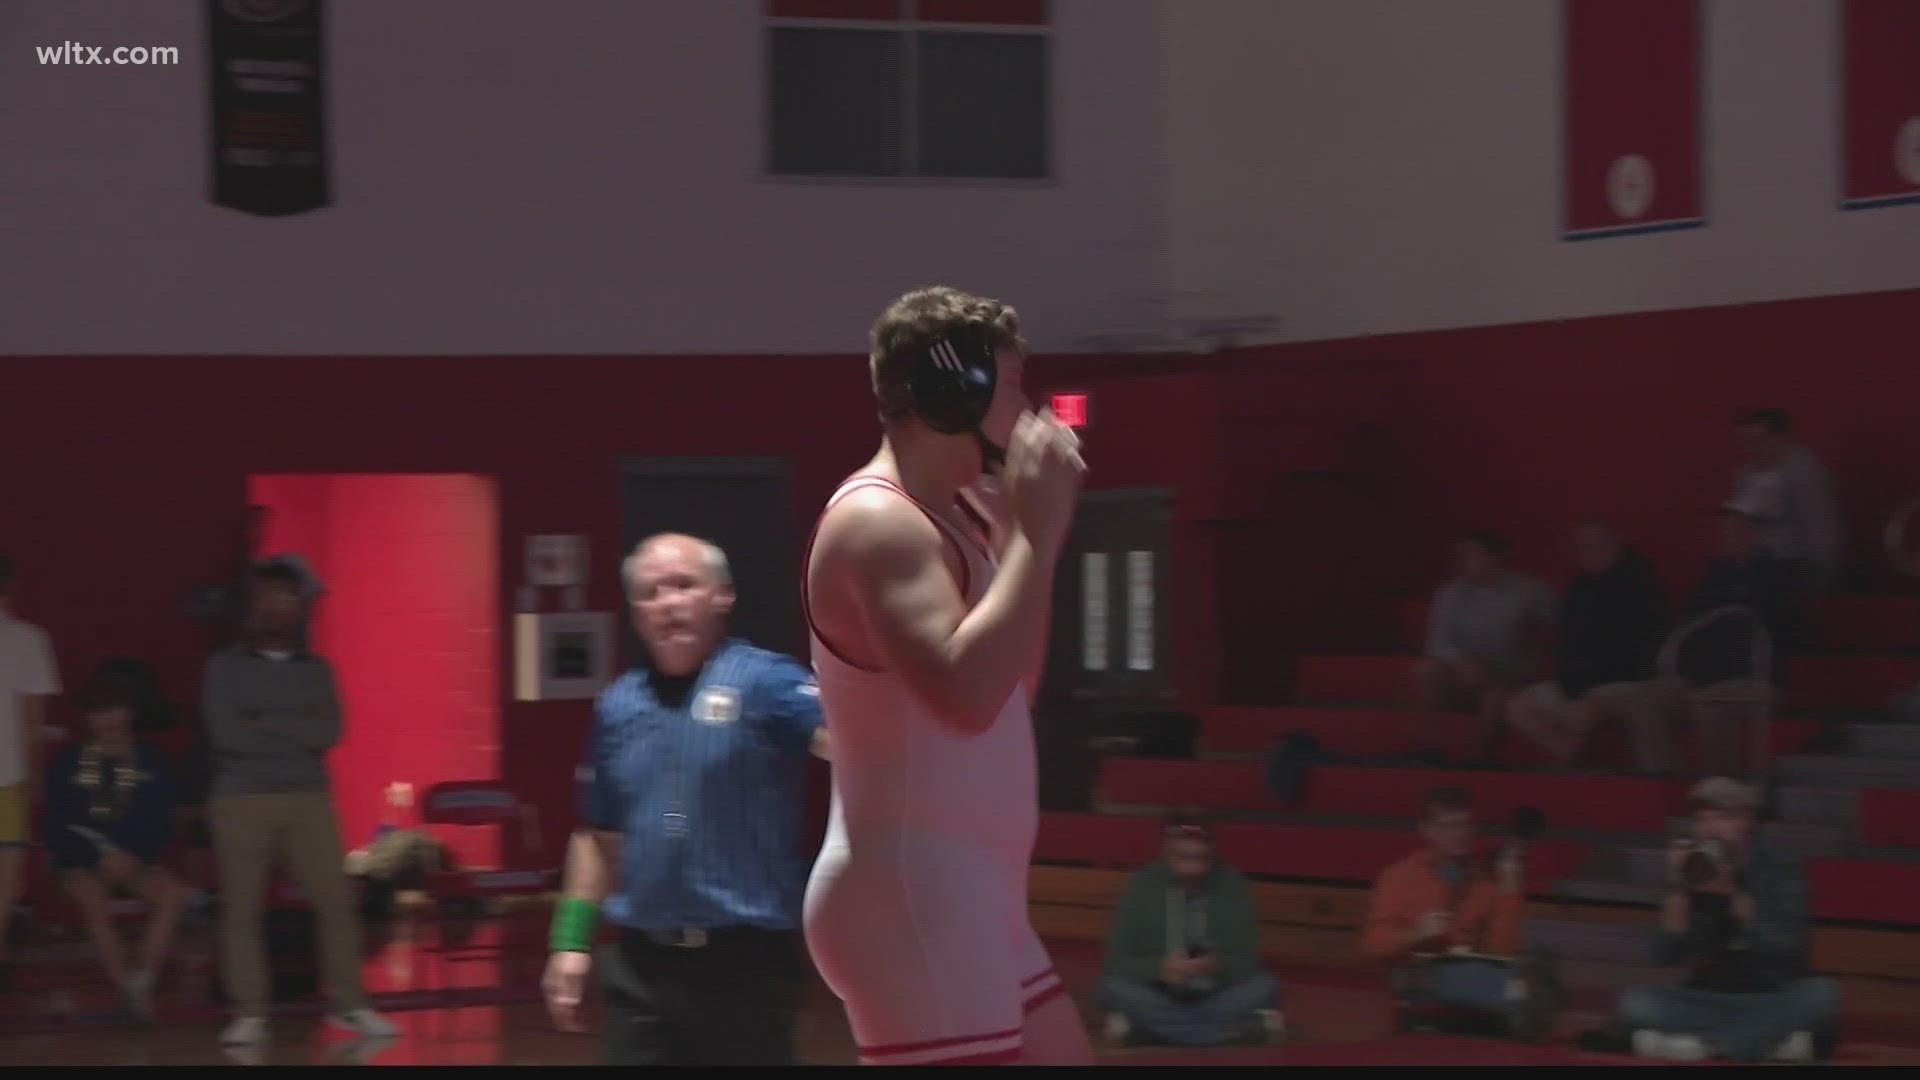 Highlights from the SCISA state wrestling championship as Cardinal Newman defeated John Paul II Catholic School 67-10.